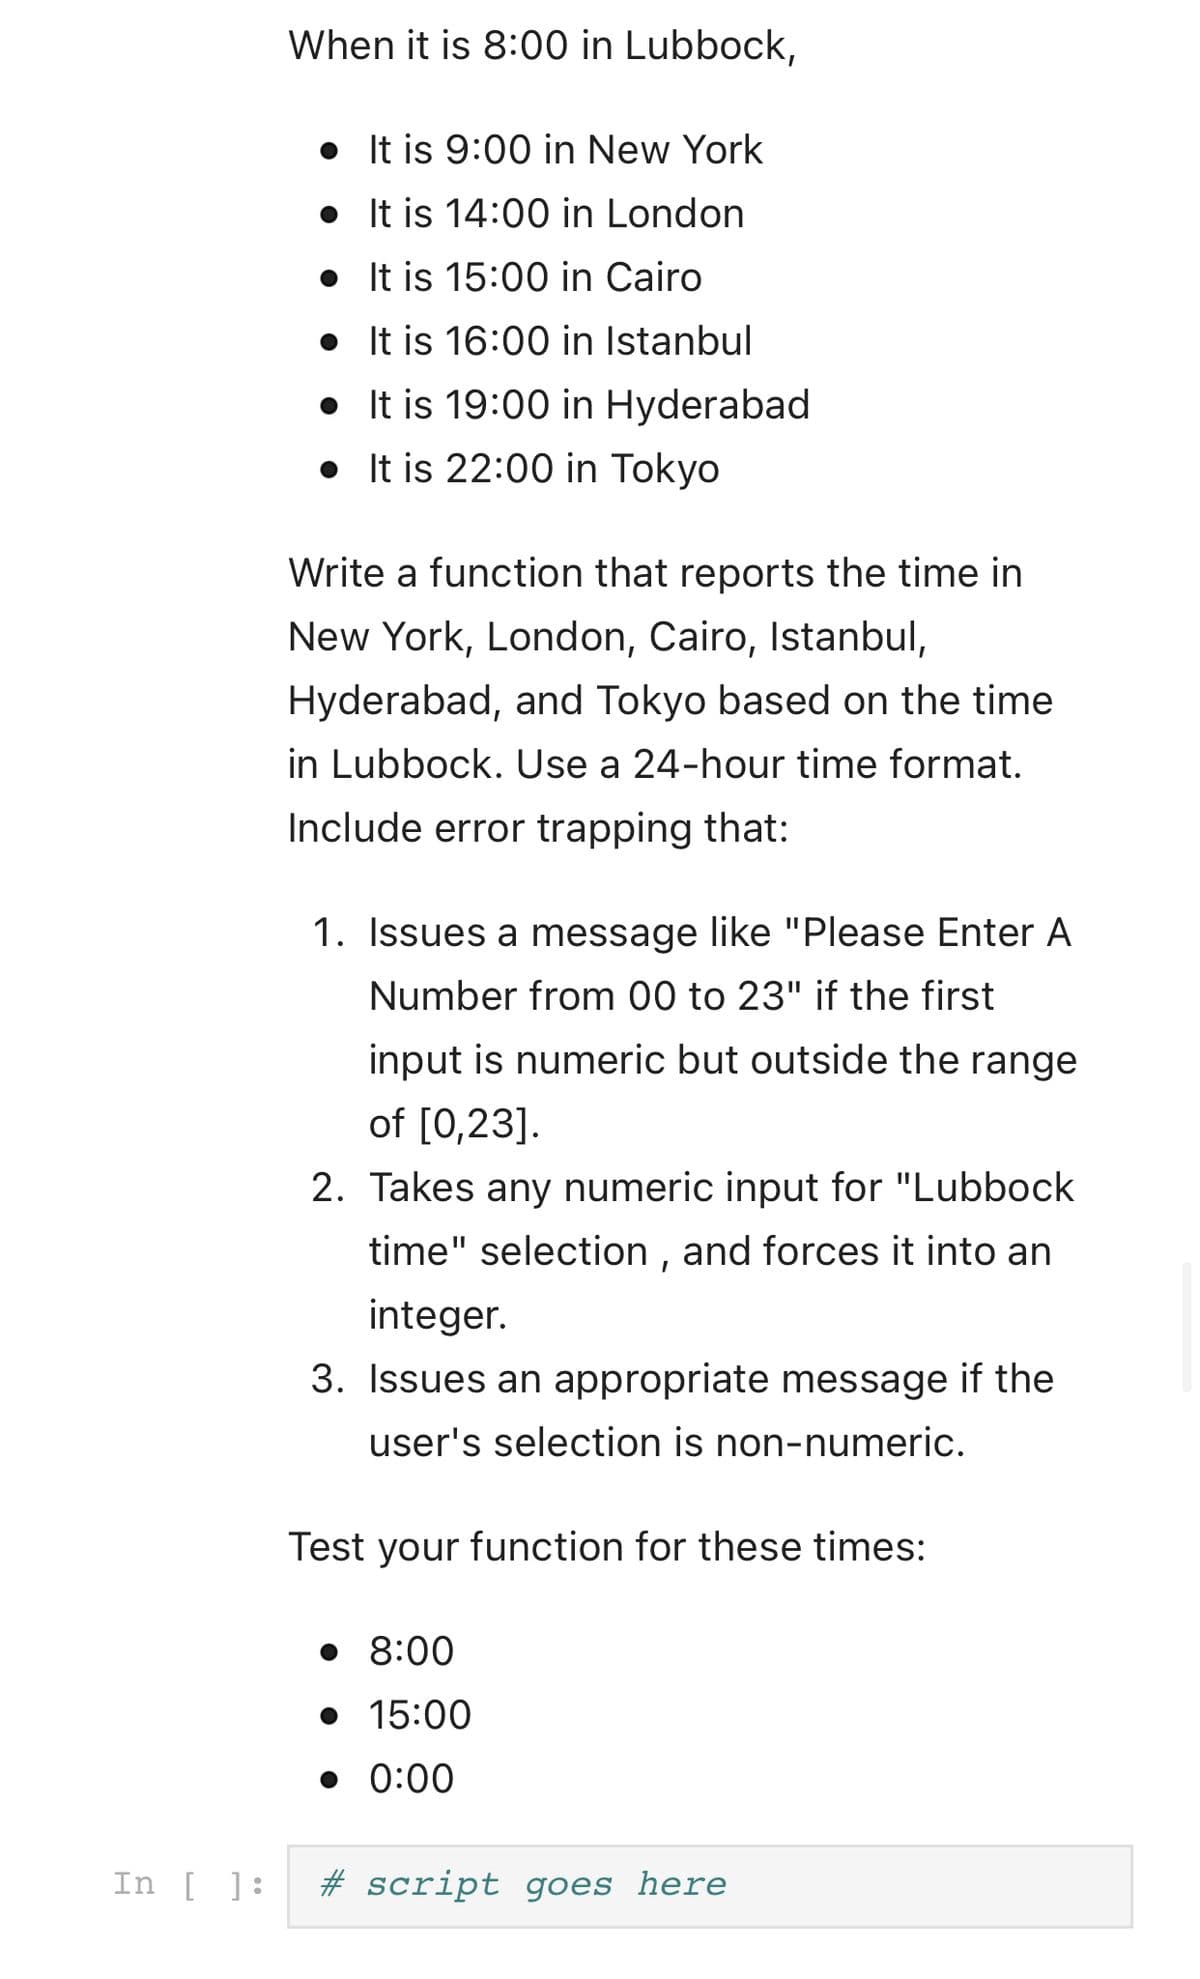 When it is 8:00 in Lubbock,
• It is 9:00 in New York
• It is 14:00 in London
• It is 15:00 in Cairo
• It is 16:00 in Istanbul
• It is 19:00 in Hyderabad
• It is 22:00 in Tokyo
Write a function that reports the time in
New York, London, Cairo, Istanbul,
Hyderabad, and Tokyo based on the time
in Lubbock. Use a 24-hour time format.
Include error trapping that:
1. Issues a message like "Please Enter A
Number from 00 to 23" if the first
input is numeric but outside the range
of [0,23].
2. Takes any numeric input for "Lubbock
time" selection , and forces it into an
integer.
3. Issues an appropriate message if the
user's selection is non-numeric.
Test your function for these times:
• 8:00
• 15:00
• 0:00
In [ ]:
# script goes here
